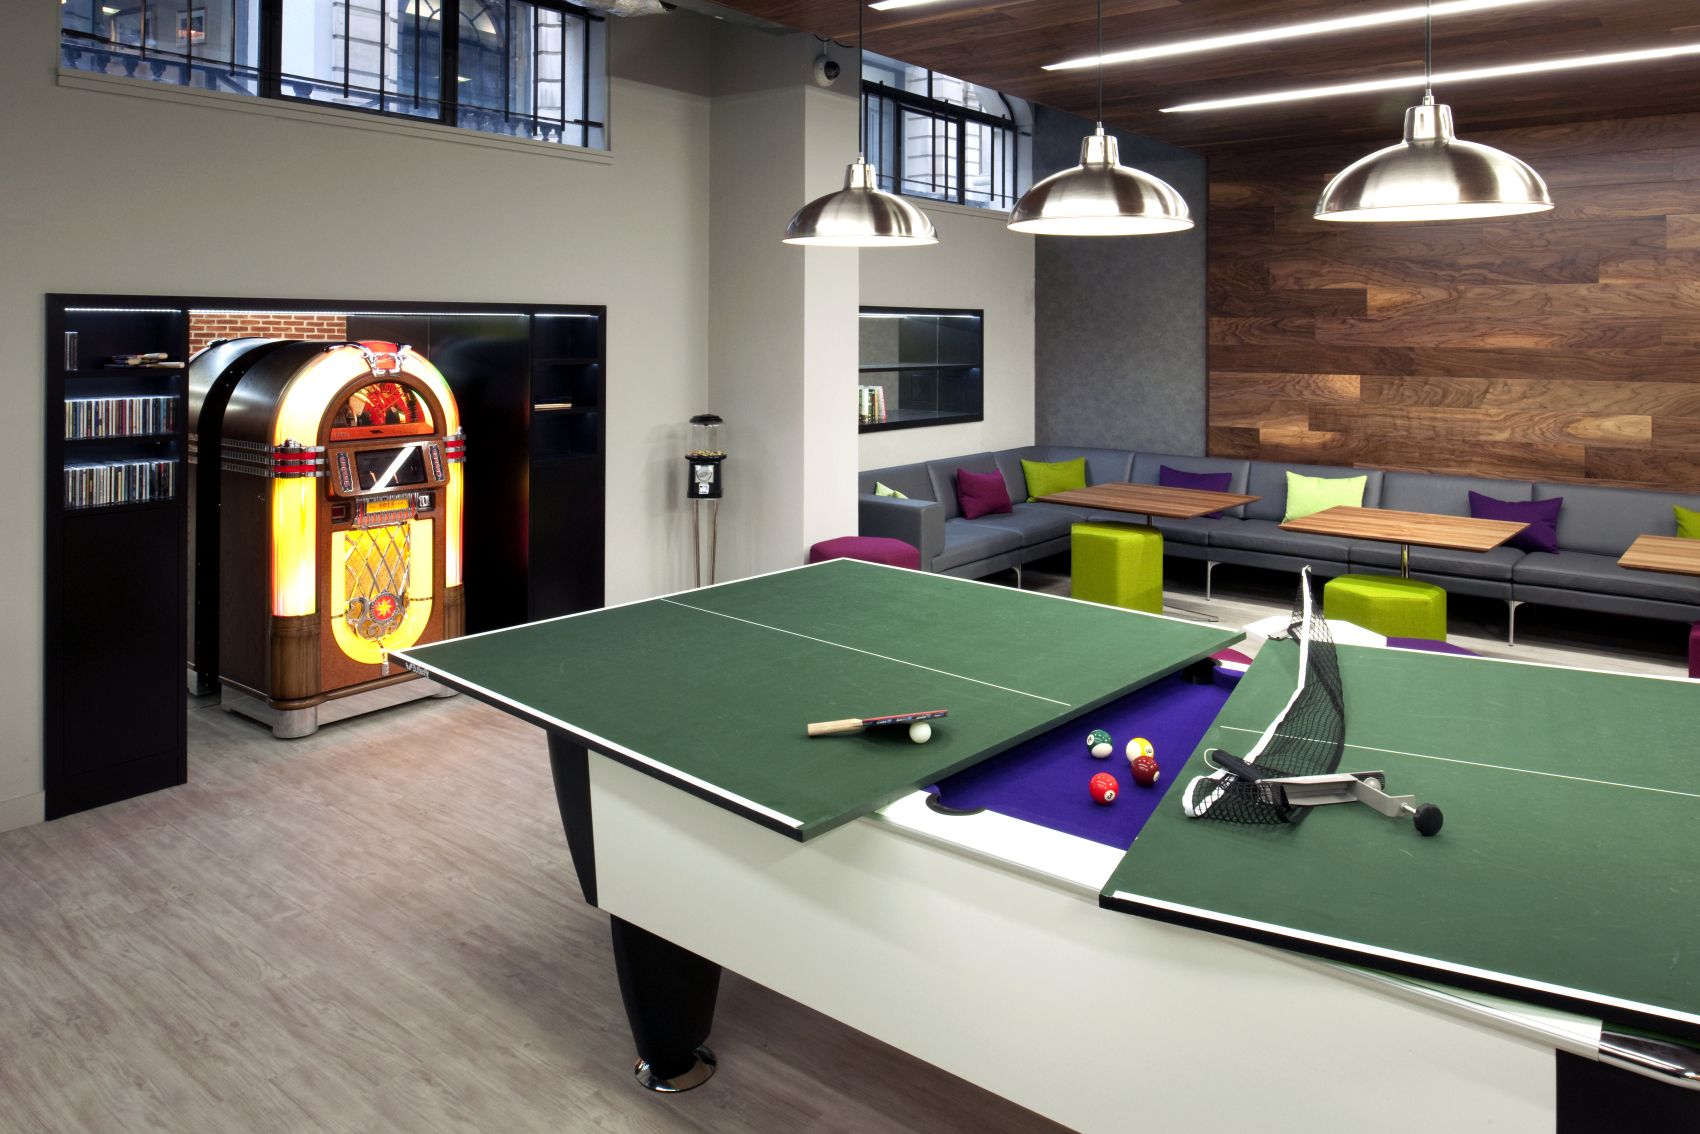 Designing-a-recreation-room-for-your-employees-1